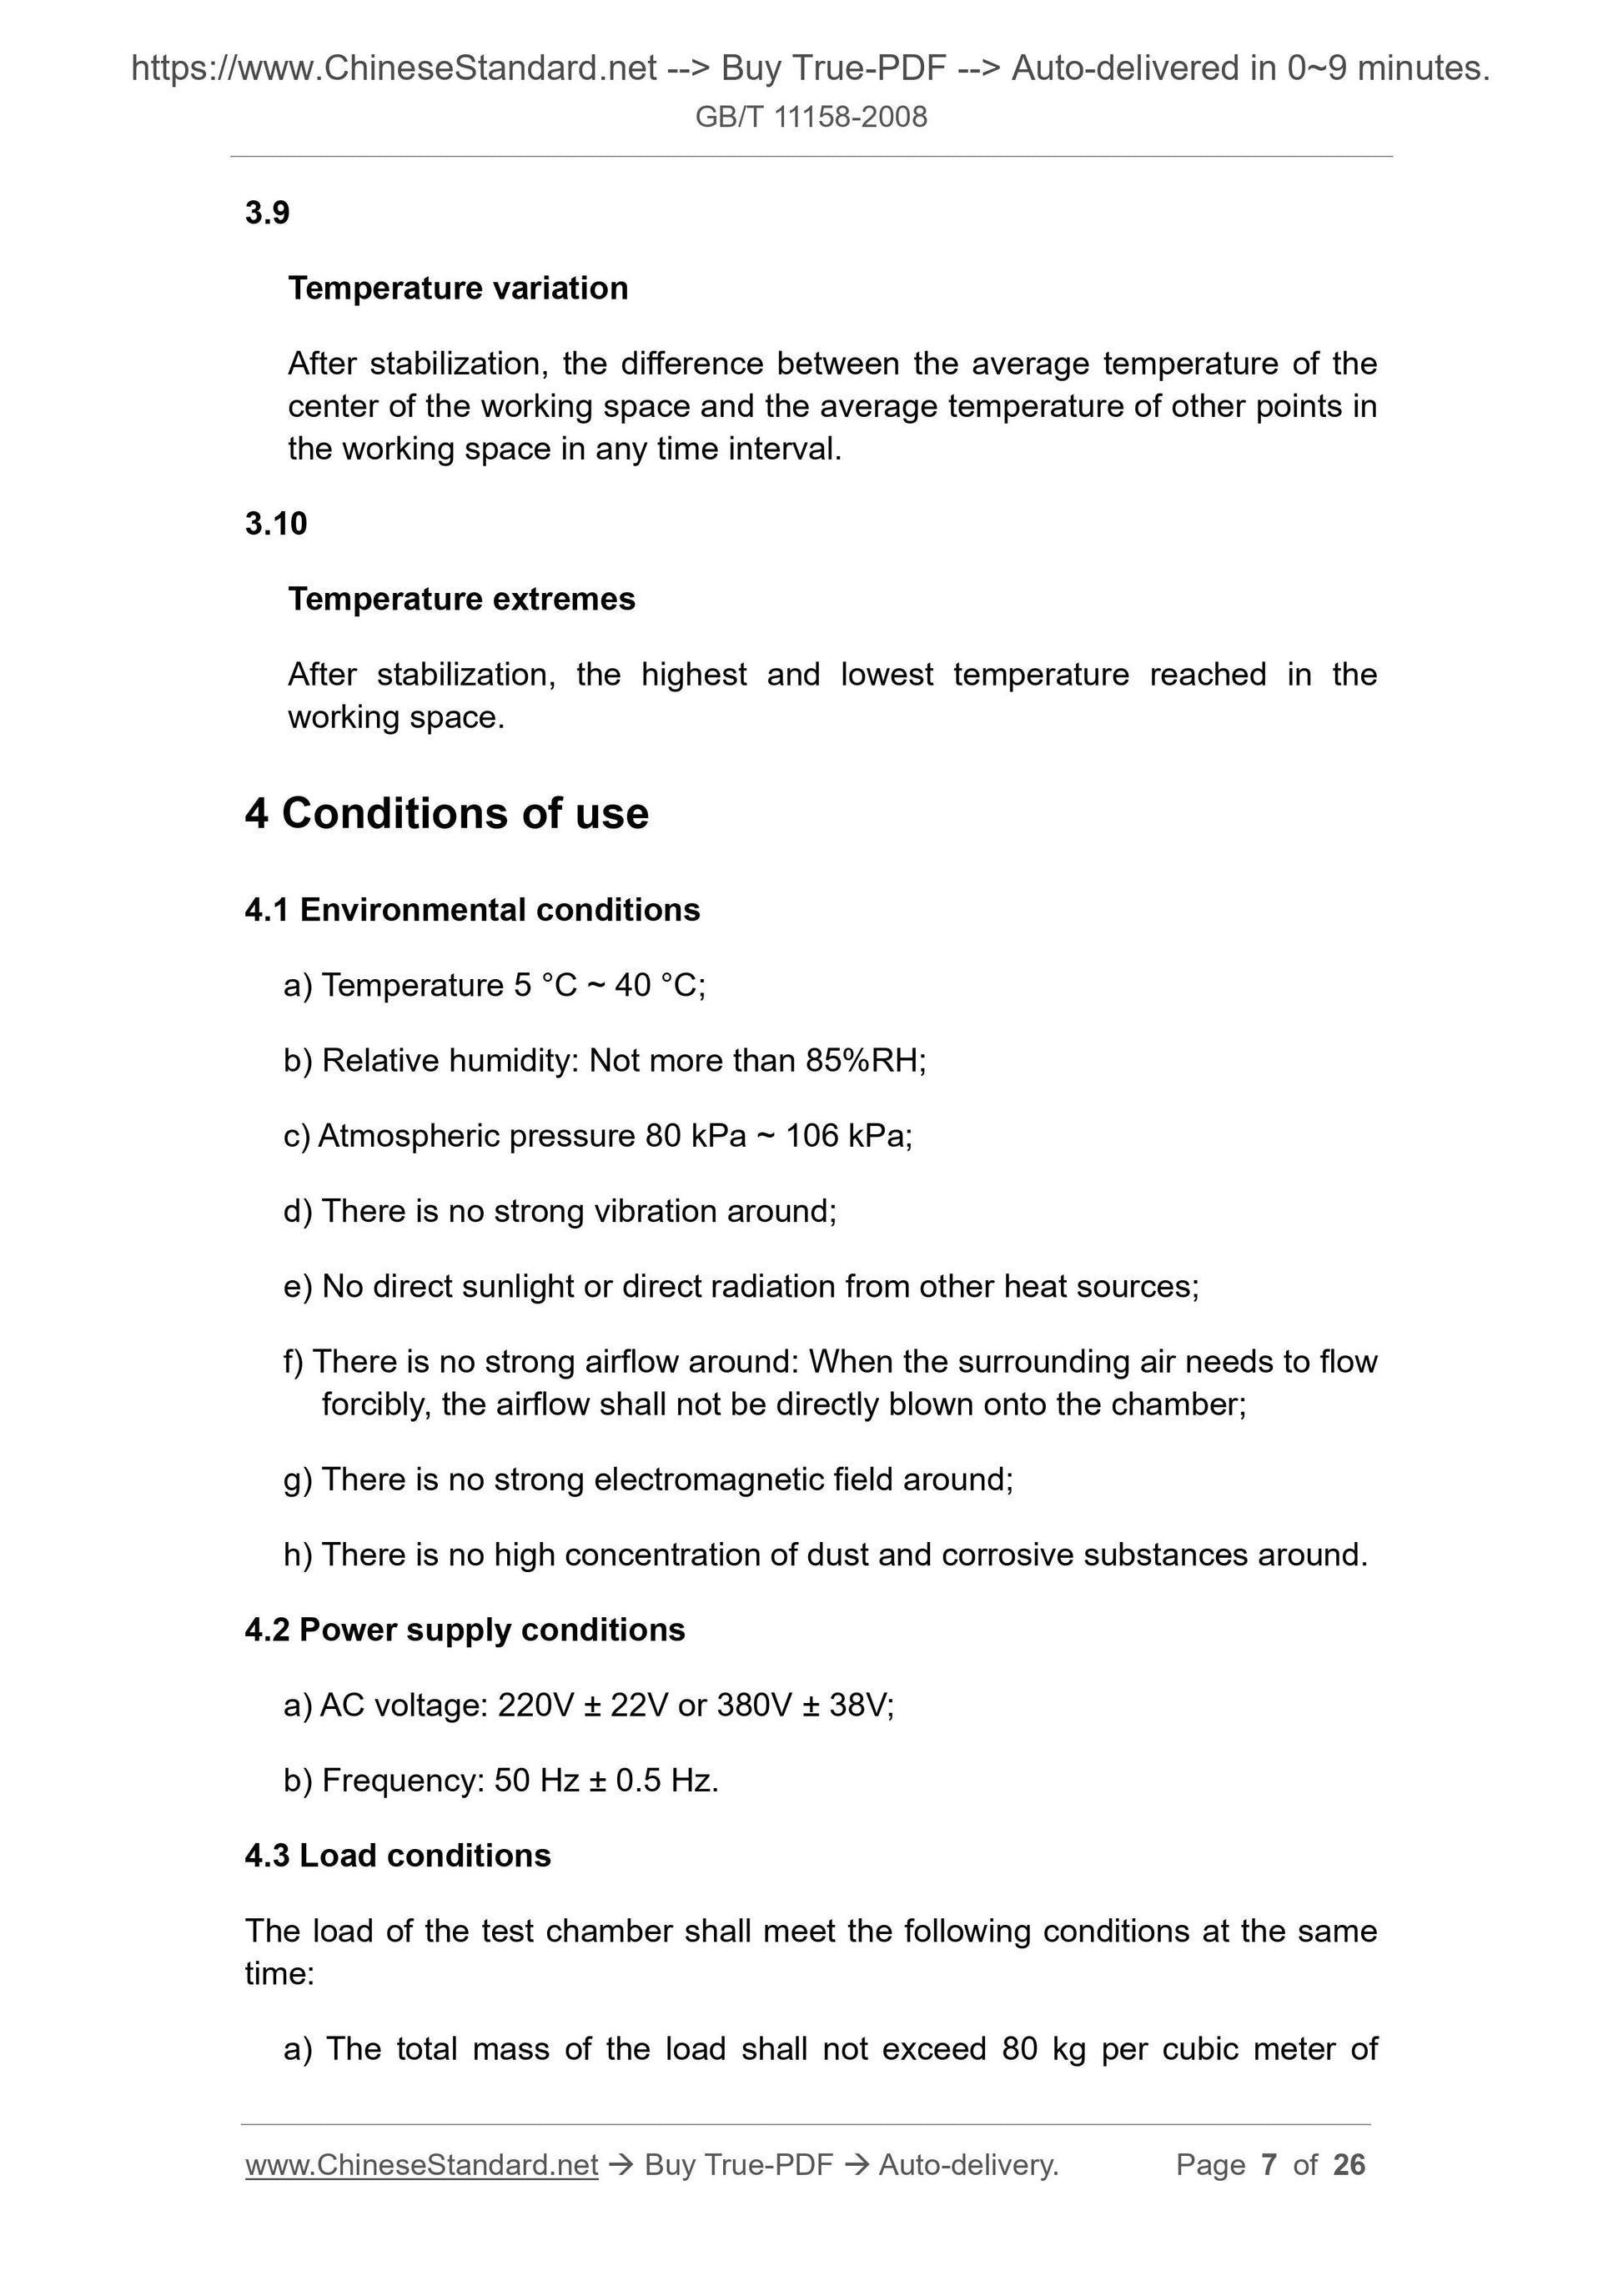 GB/T 11158-2008 Page 4